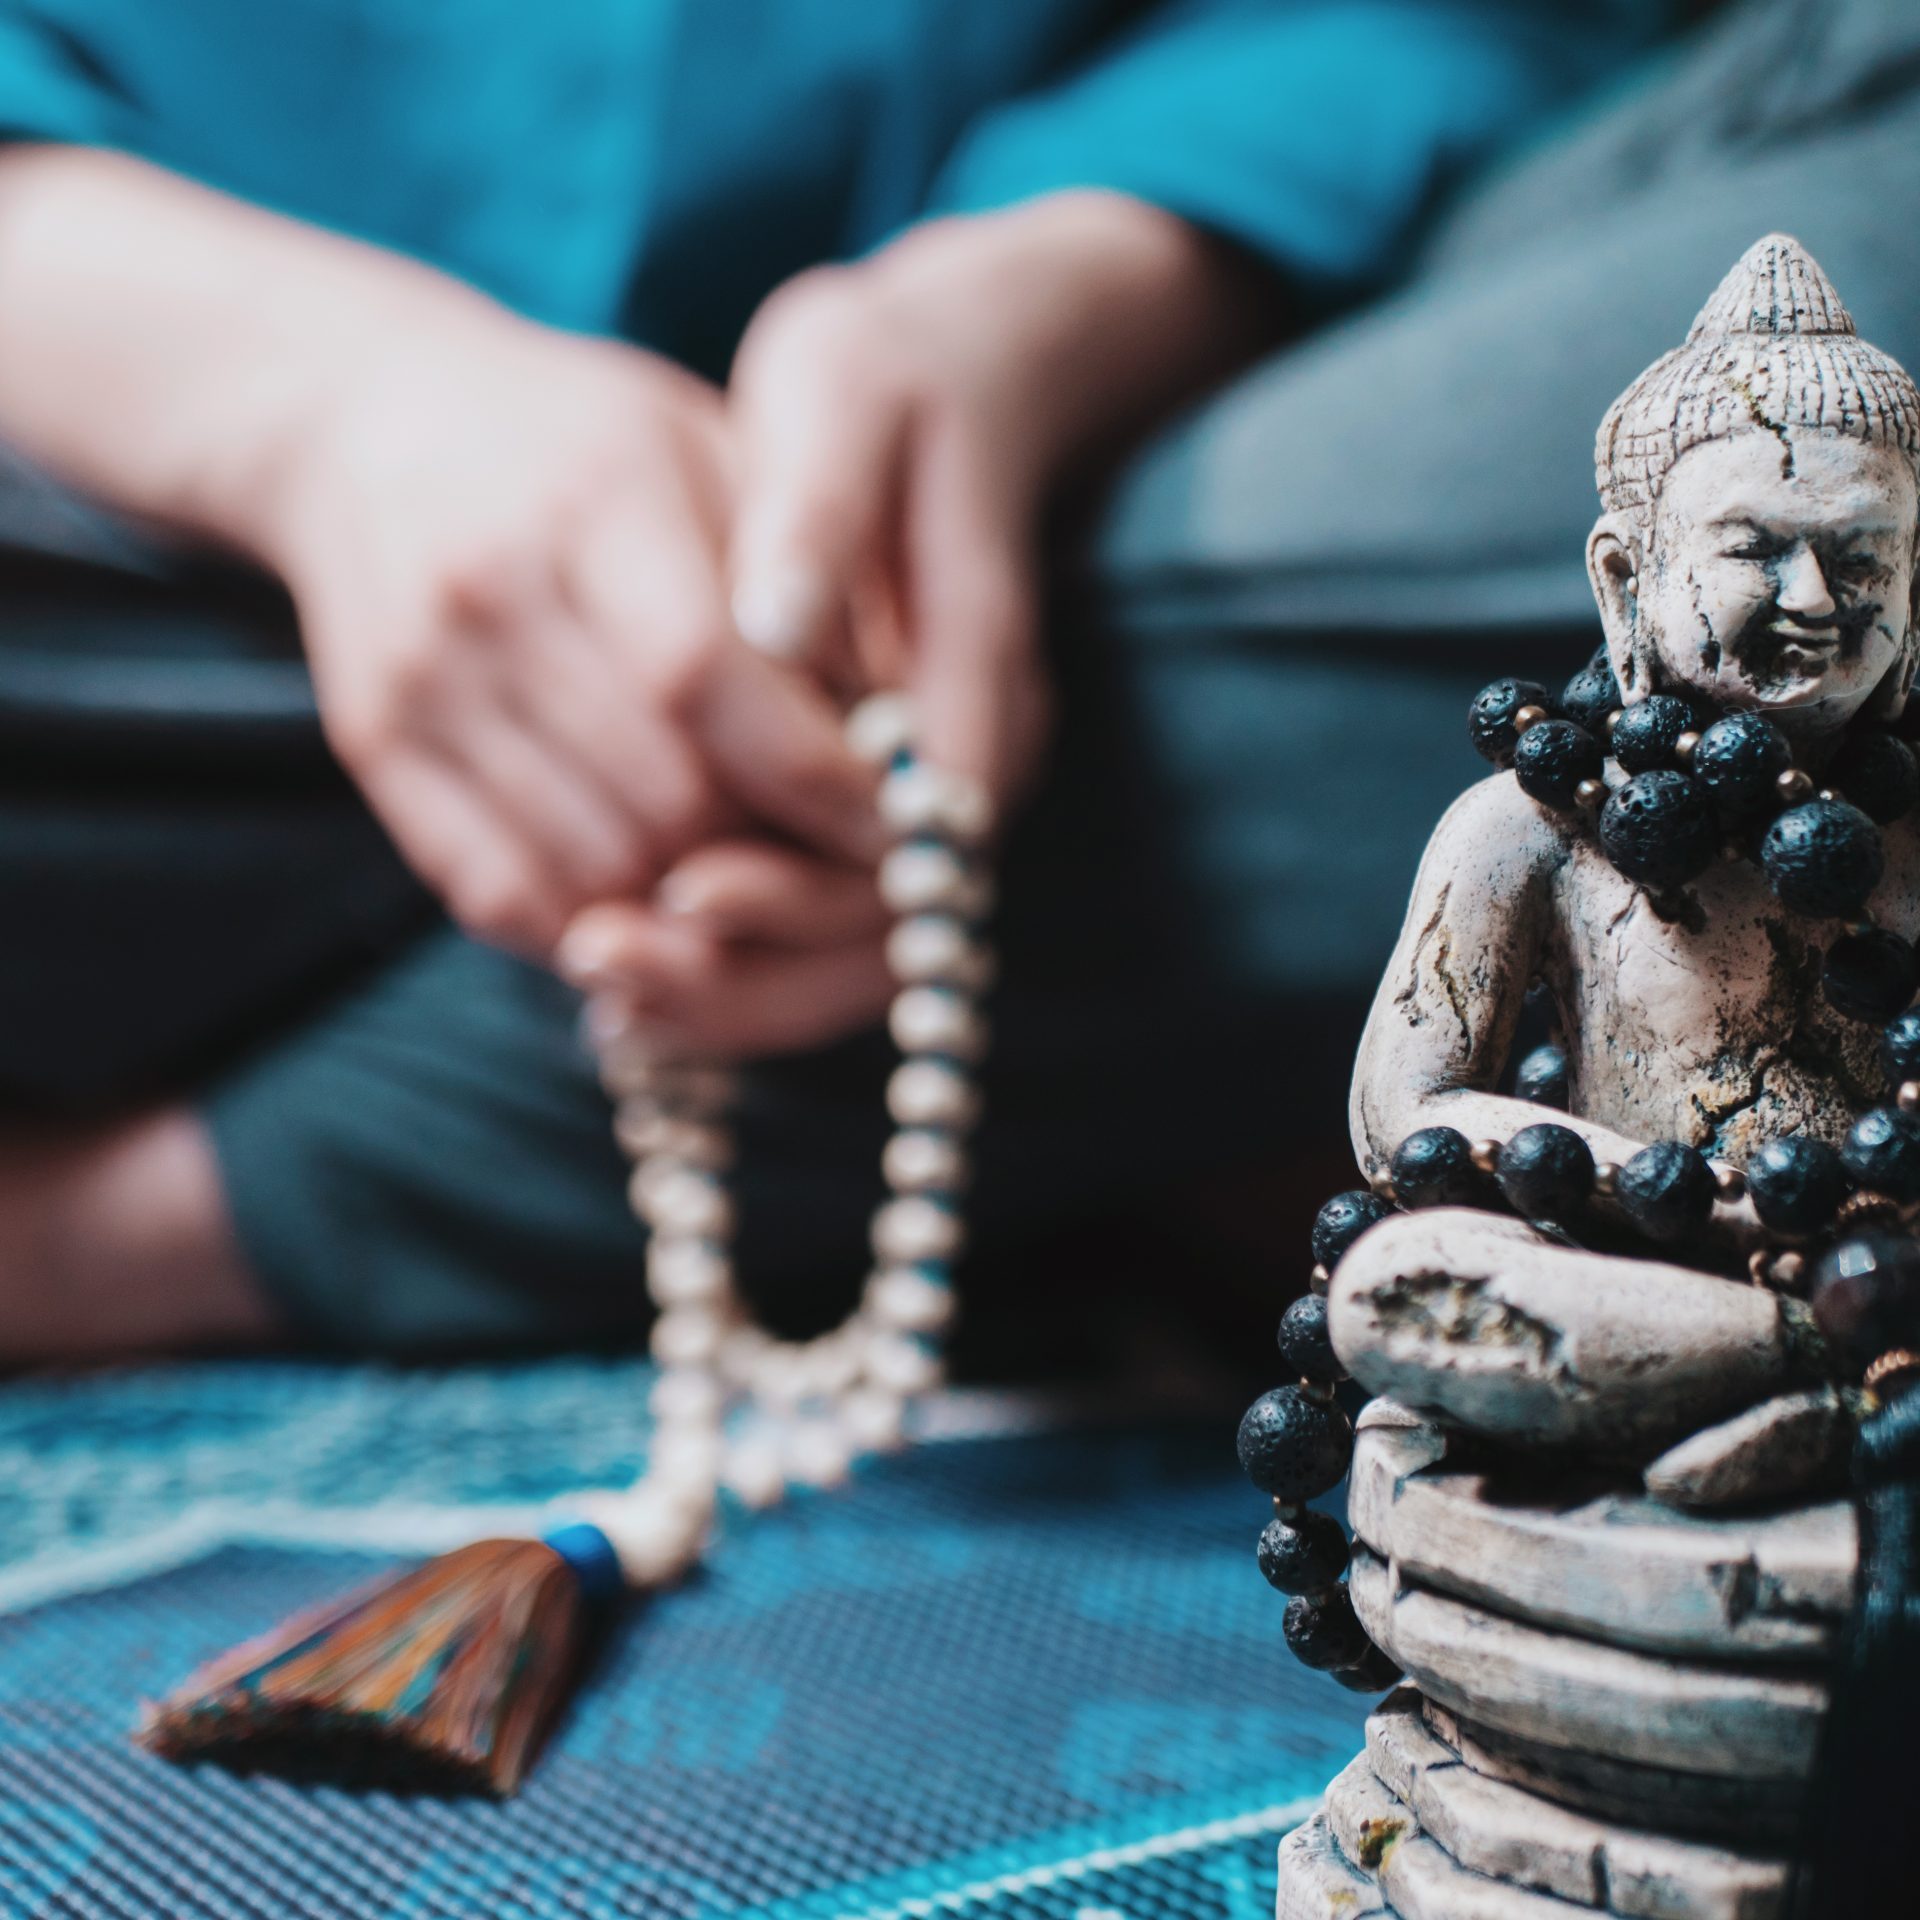 Concentrated woman praying with wooden rosary mala beads. Namaste. Close up statue of Buddha.